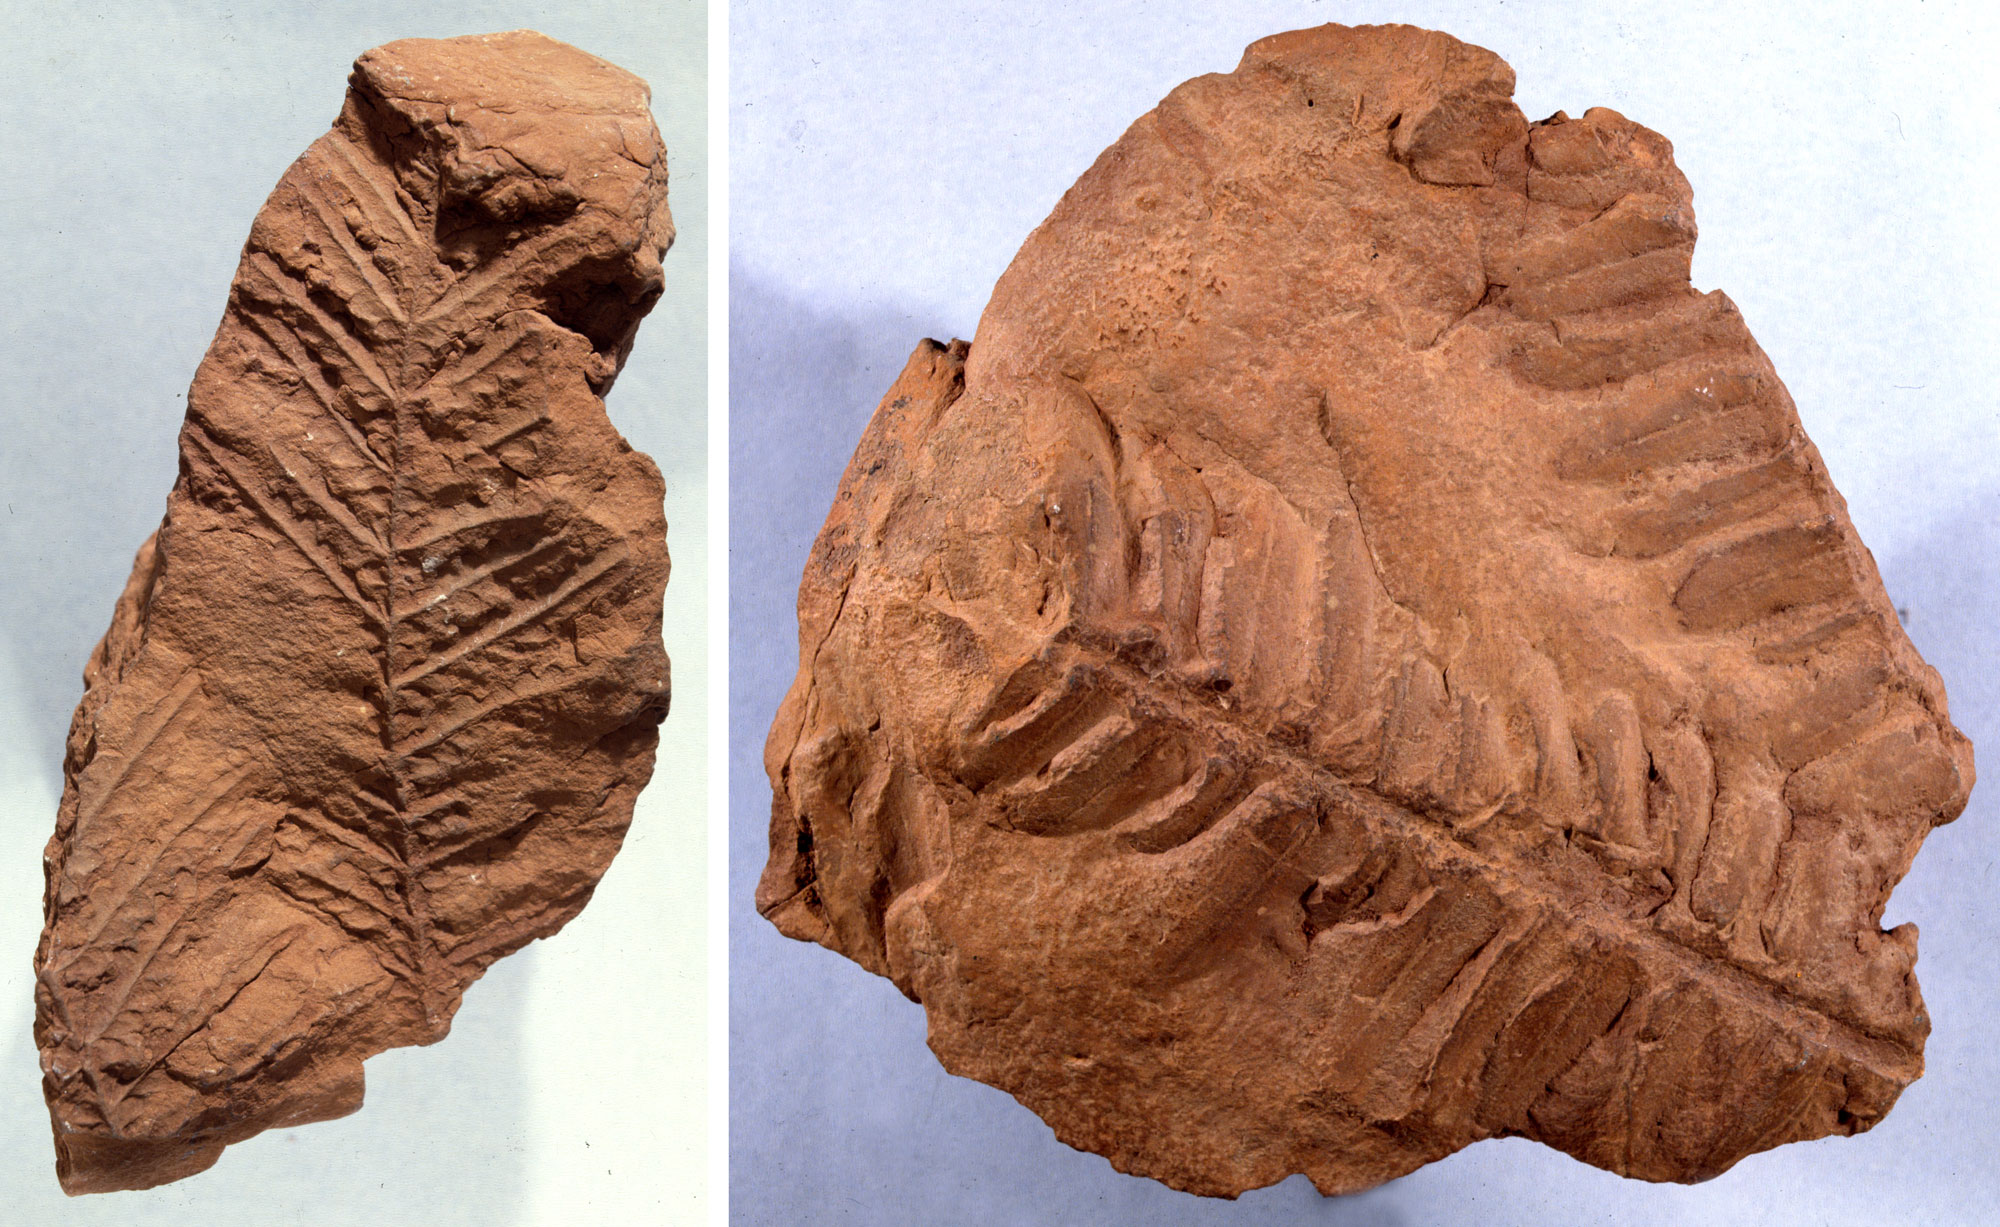 2-panel figure showing photos of unidentified seed fern fronds from the Permian Hermit Formation, Grand Canyon. Panel 1: Image of a large part of a frond with a fragment of a second frond to its left; the fronds are pinnately compound. Panel 2: Portions of two pinnately compound fronds.